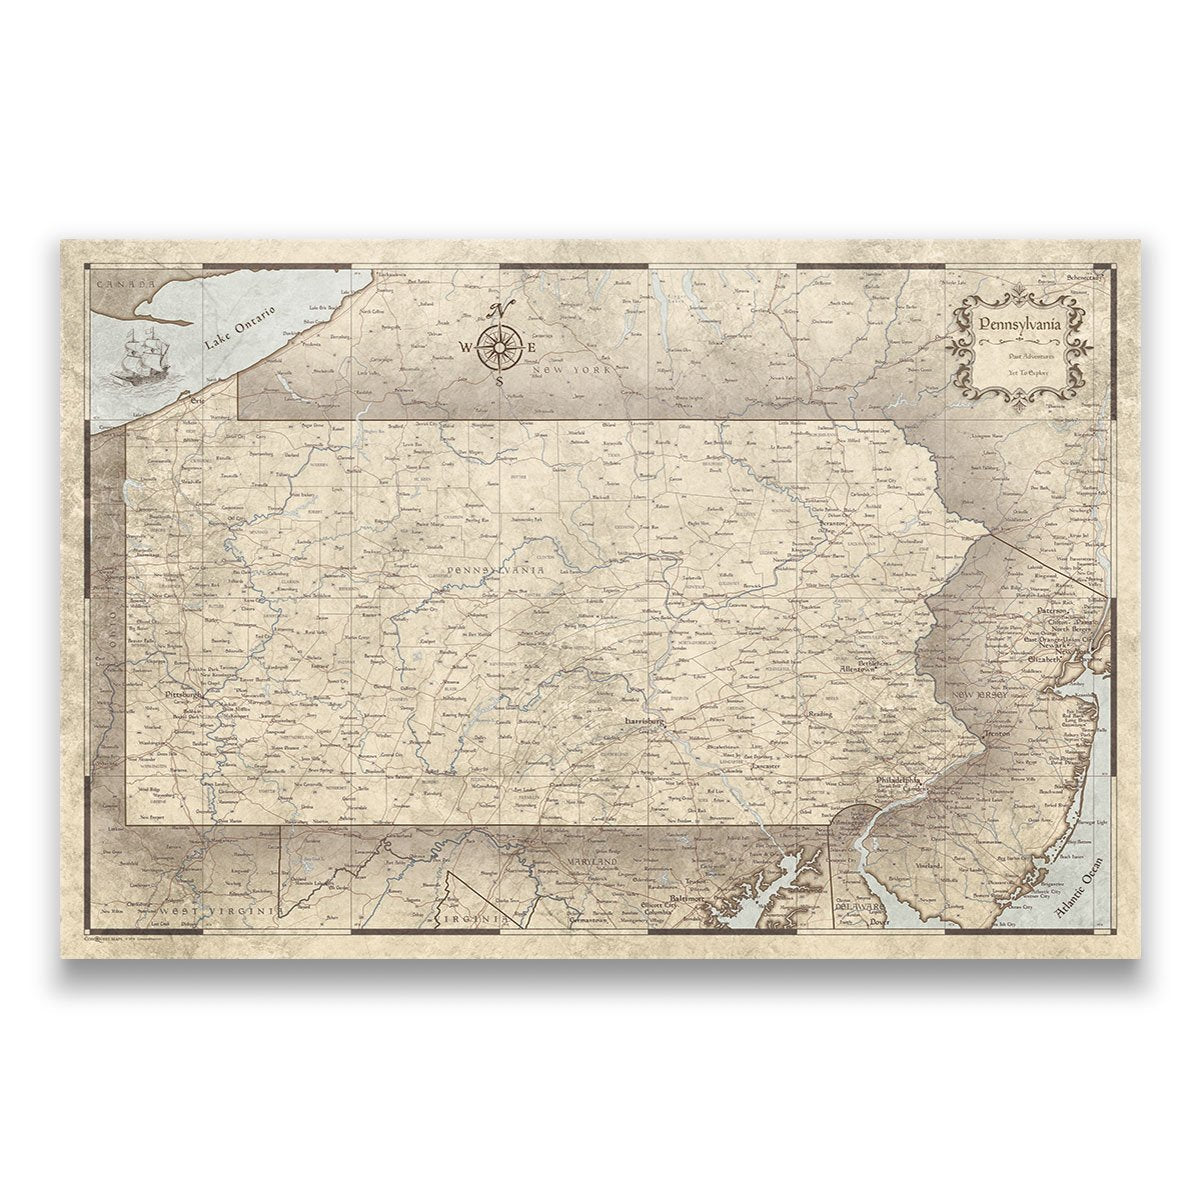 Pennsylvania Travel Maps With Push Pins